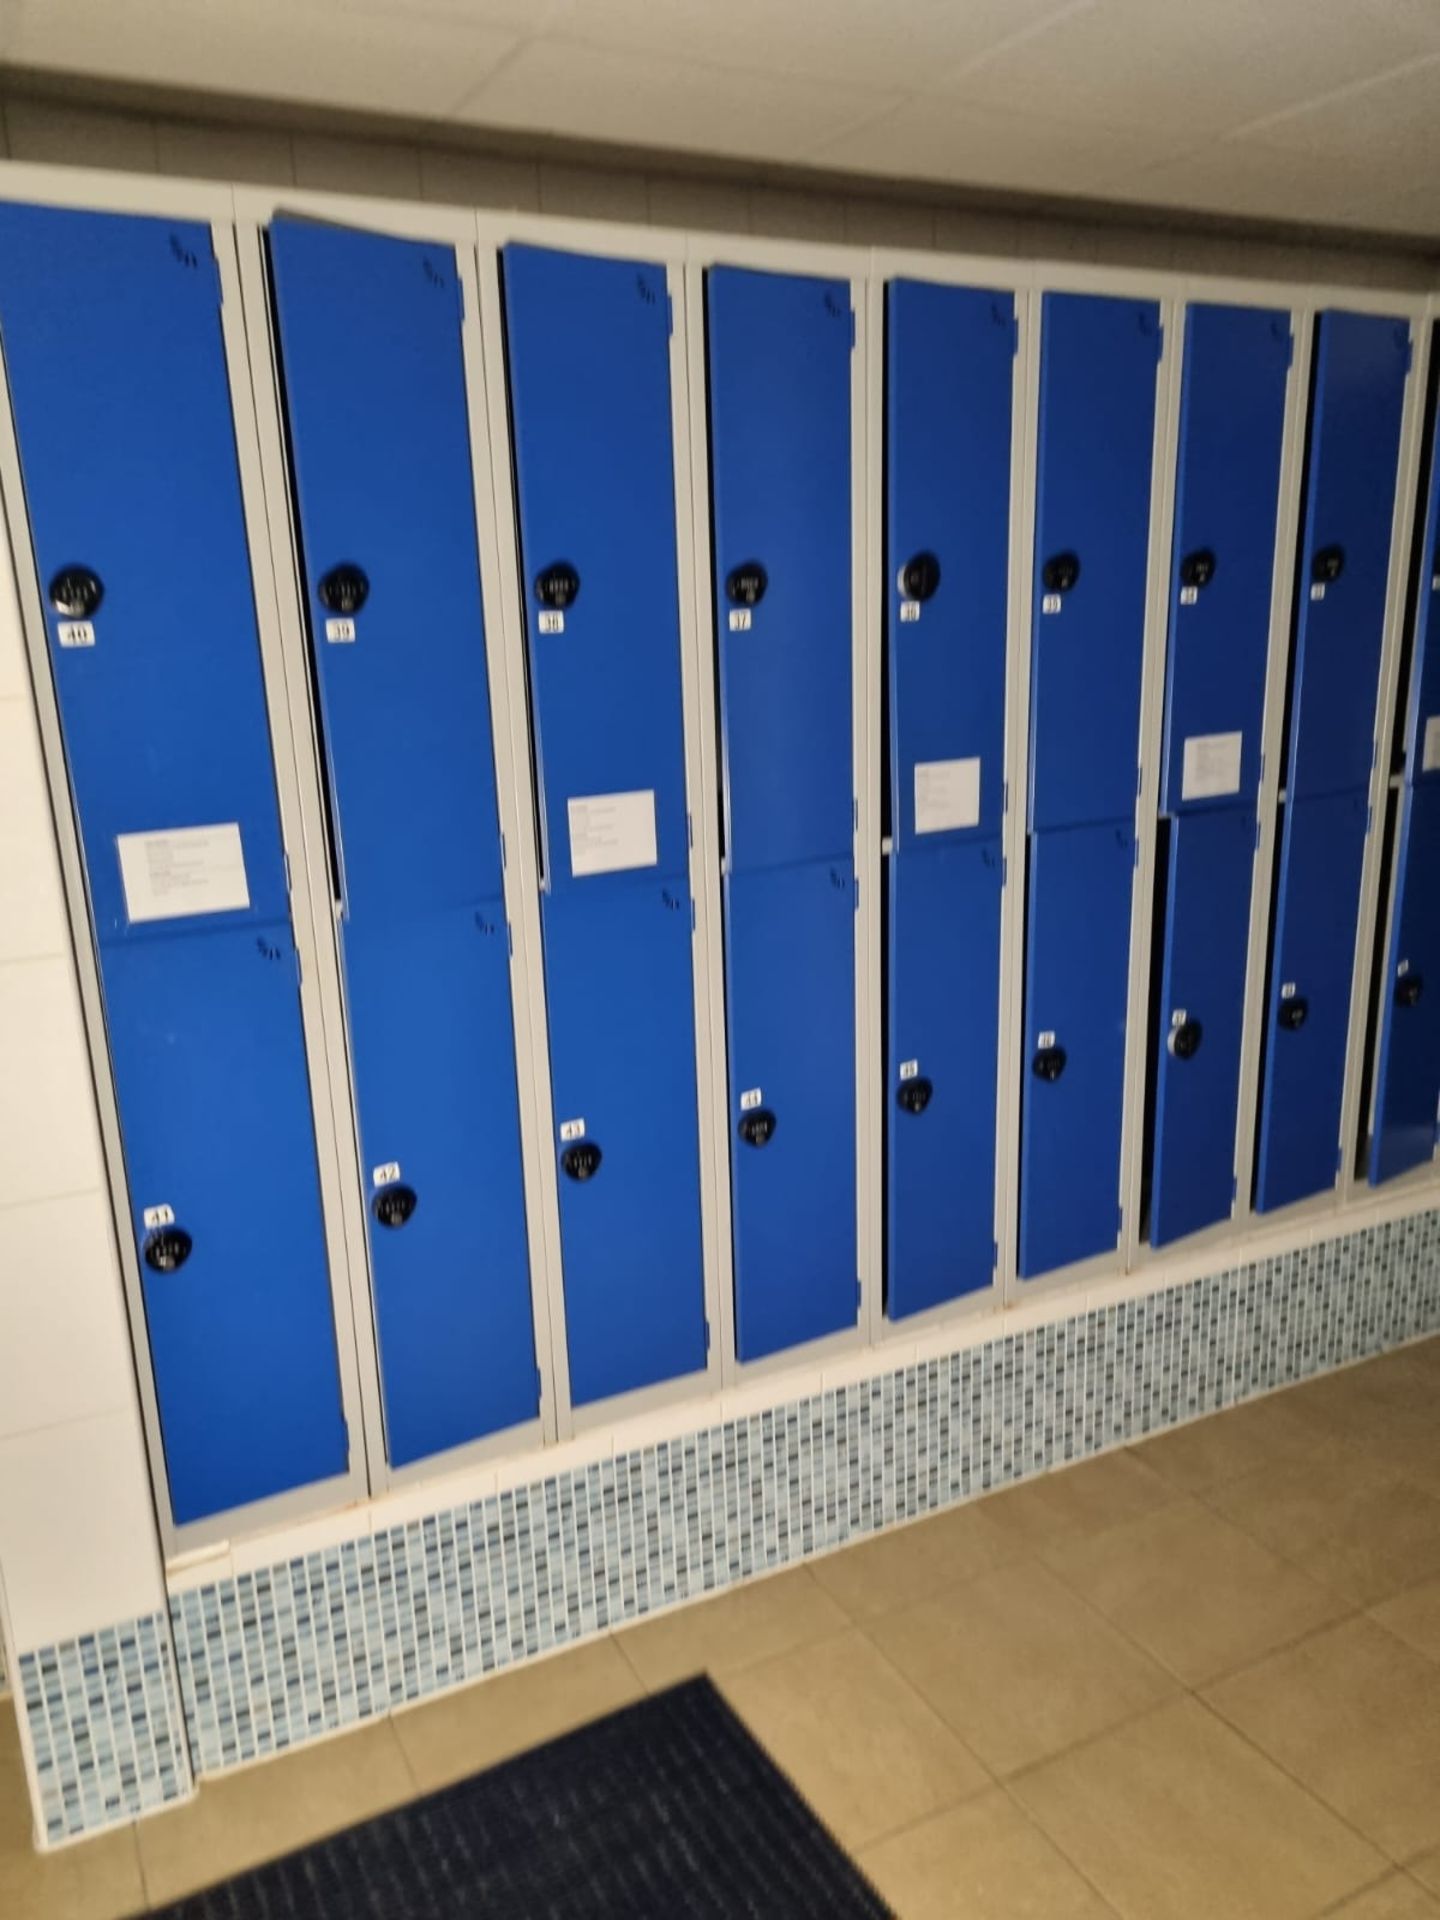 Garran Fully Welded Compartment Lockers Bank of 40 ( Leisure Centre ) - Image 2 of 2